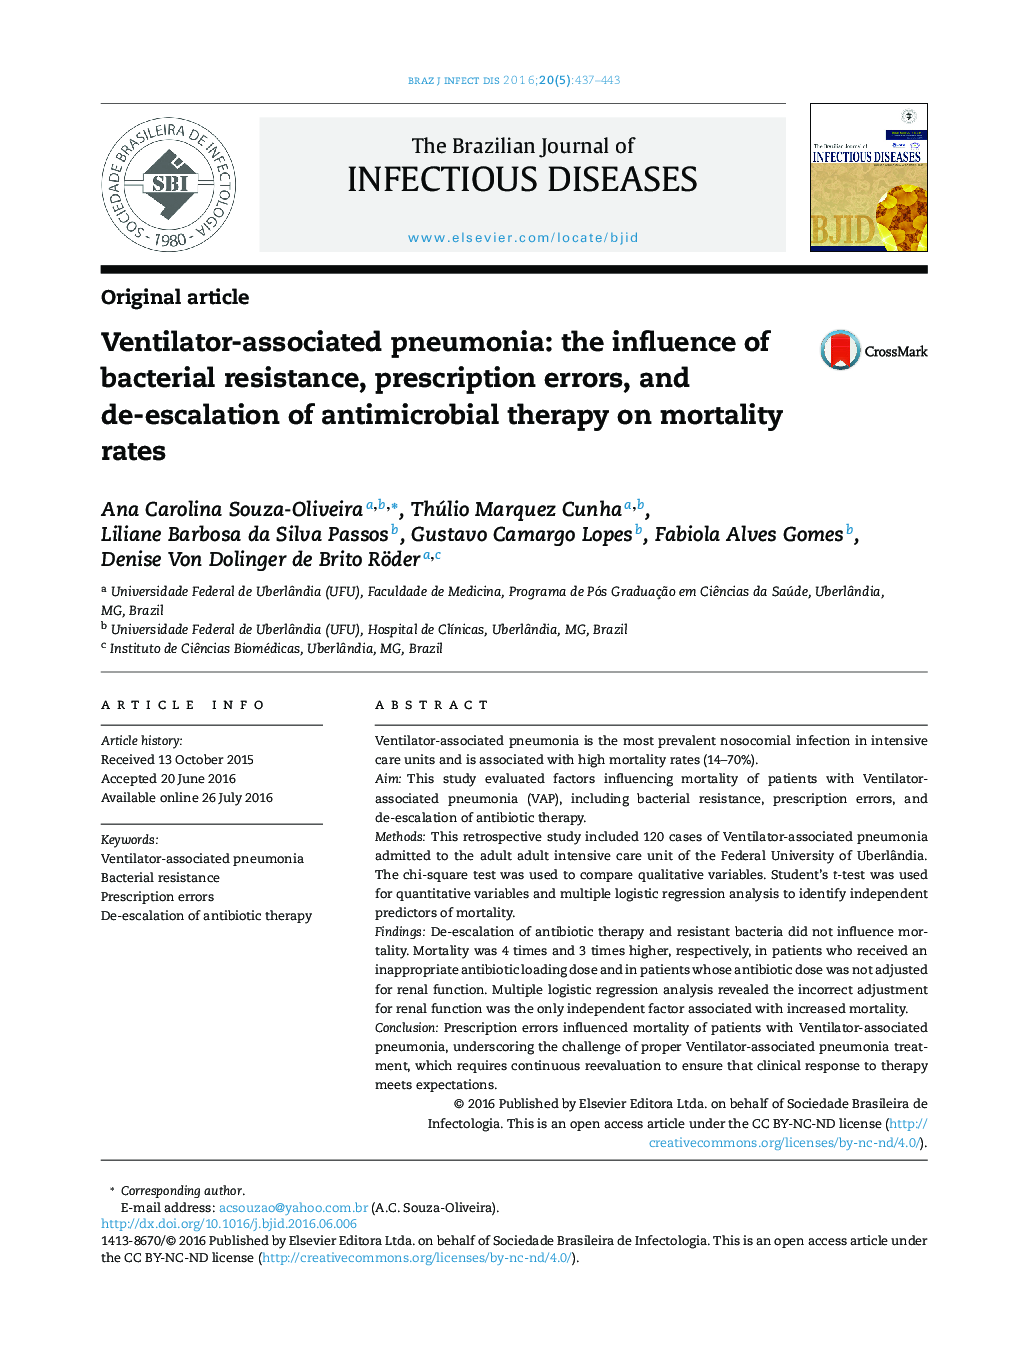 Ventilator-associated pneumonia: the influence of bacterial resistance, prescription errors, and de-escalation of antimicrobial therapy on mortality rates